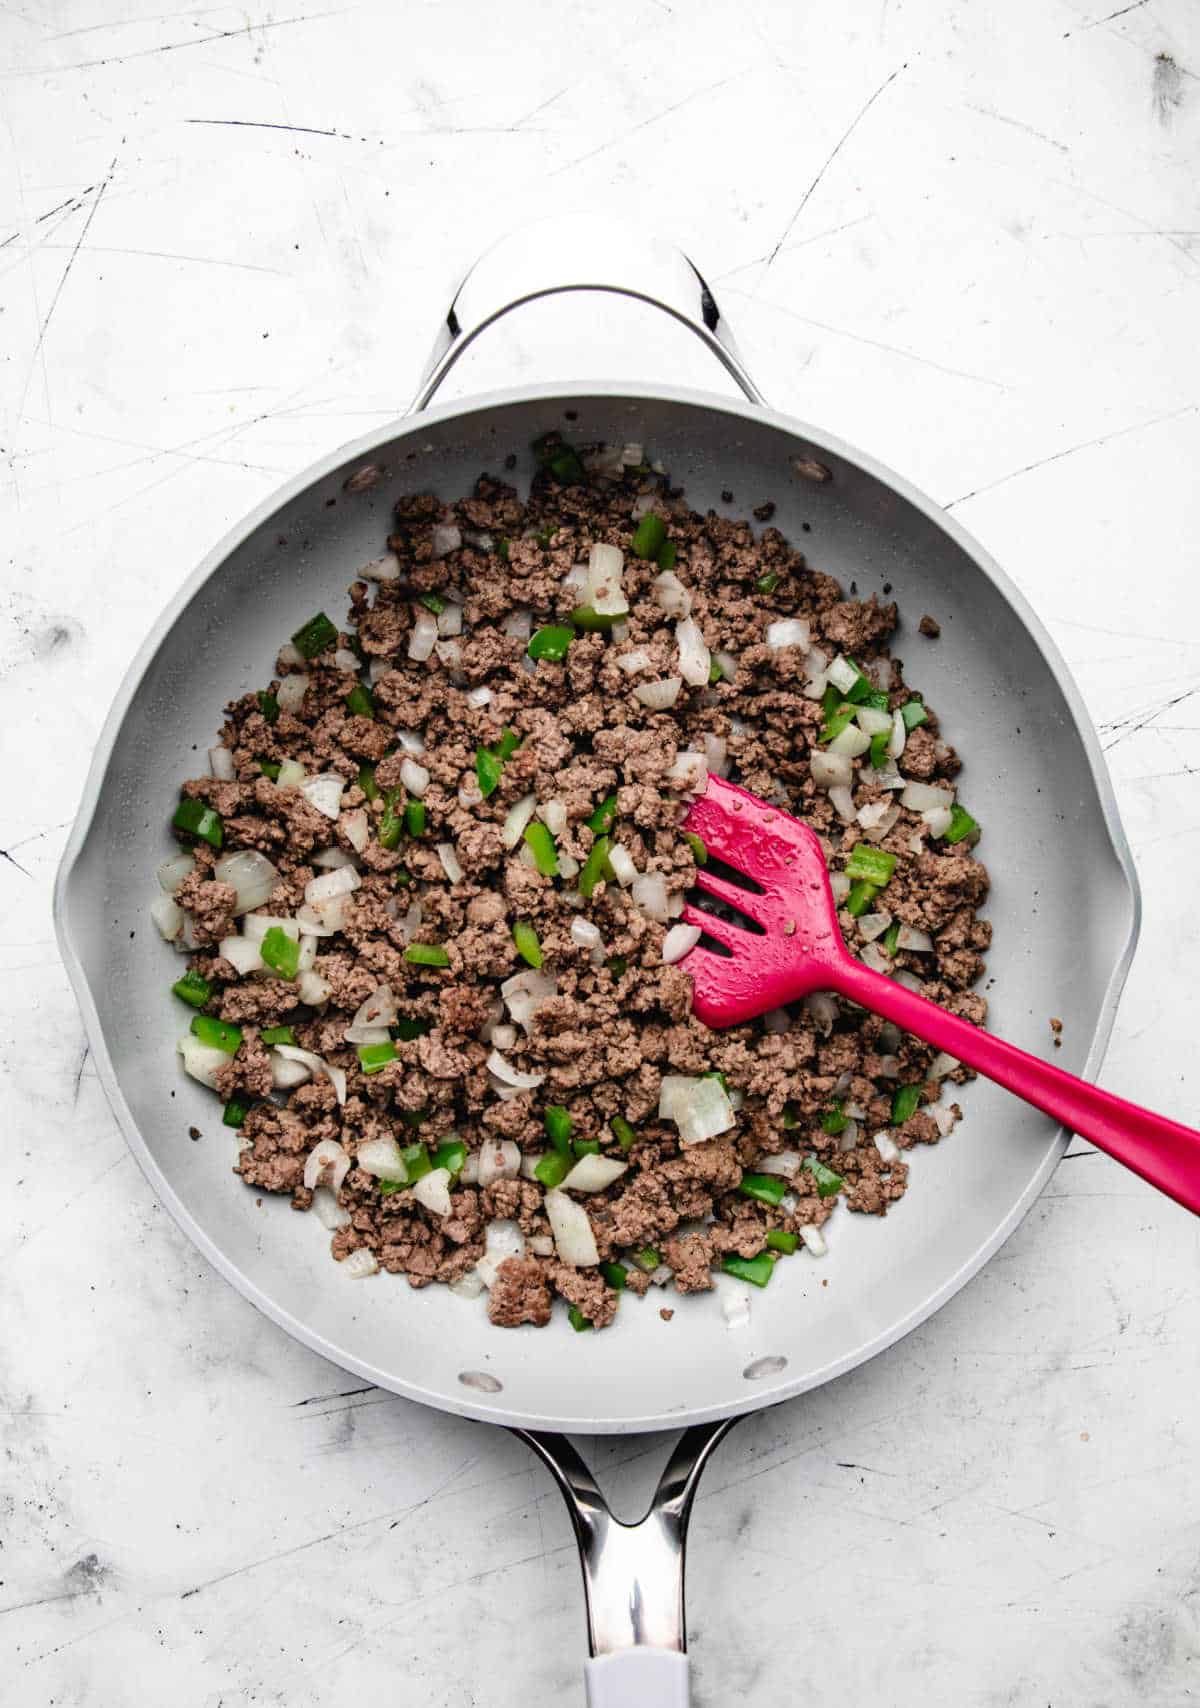 Green bell pepper and onion in ground beef in a skillet.